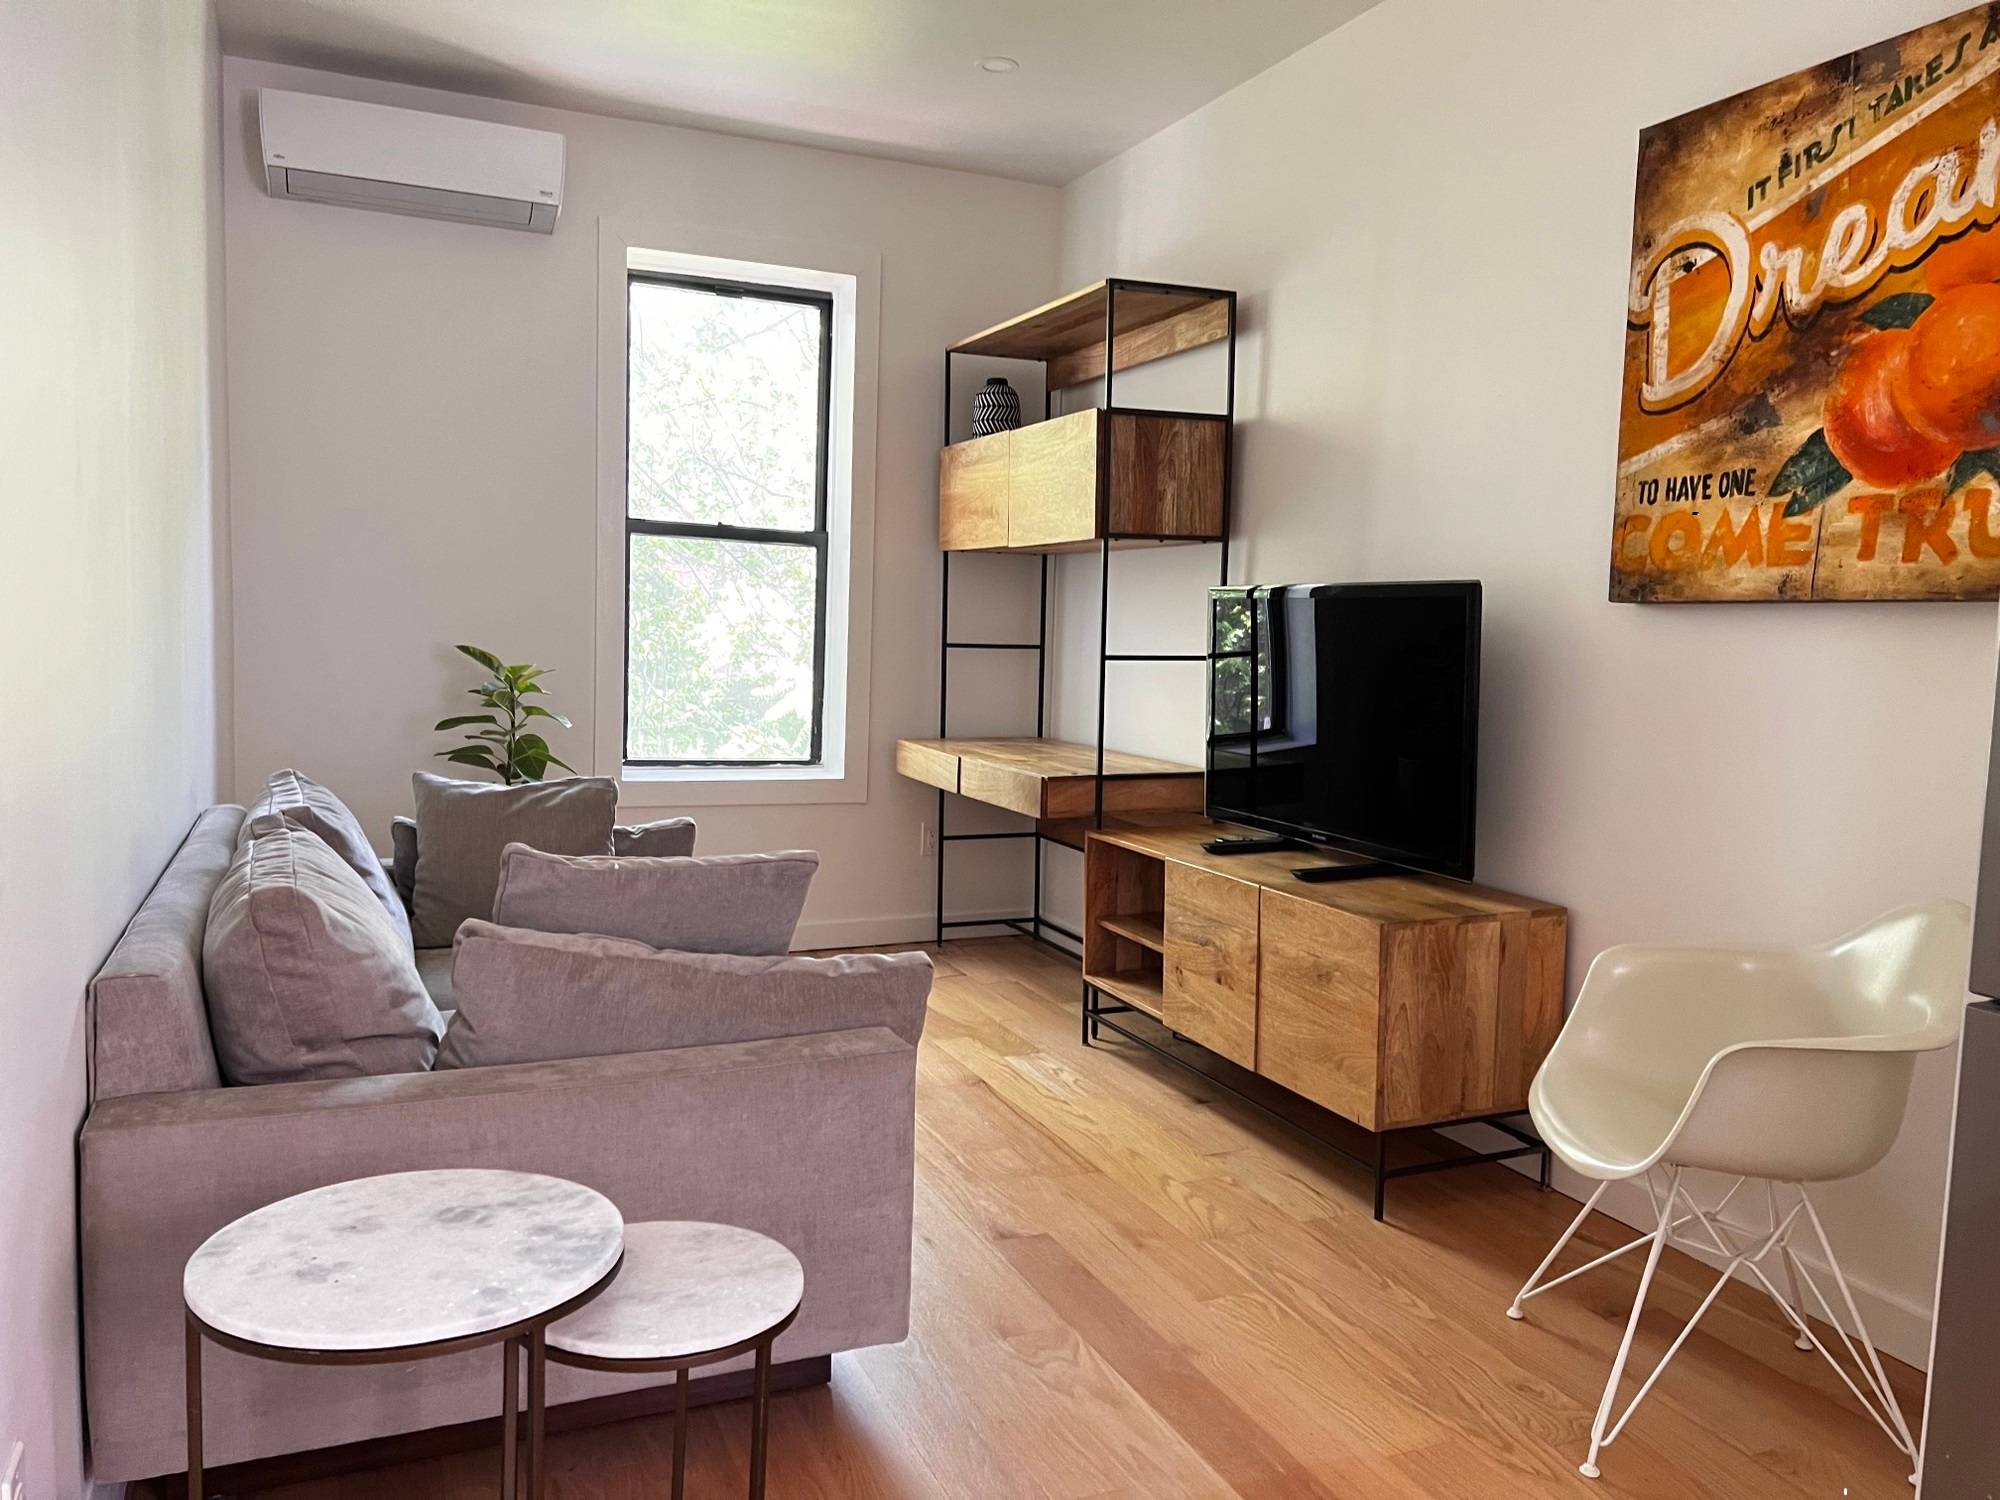 Tastefully renovated Bed Stuy one bedroom apartment.